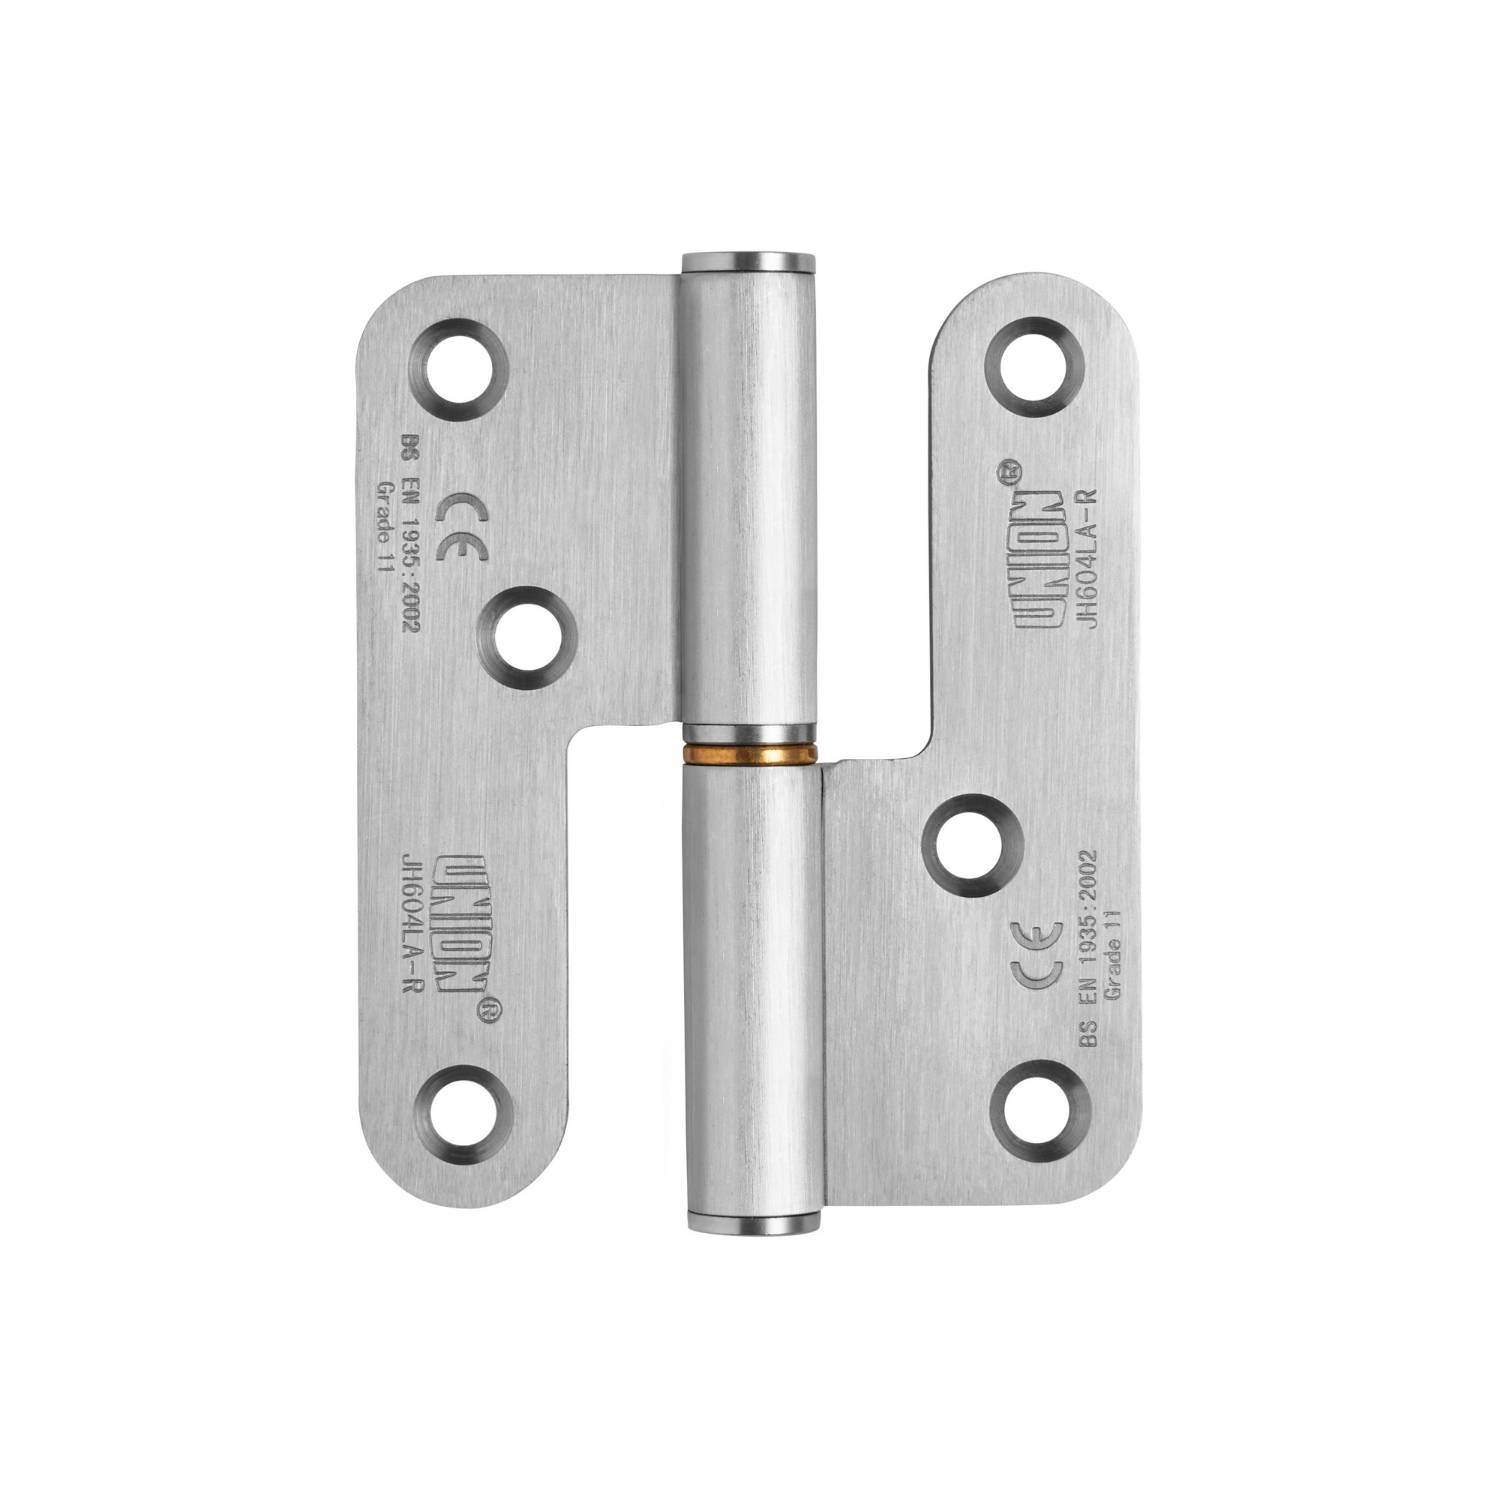 ASSA ABLOY Performance Hinges Maintenance free - Lift-Off Hinges